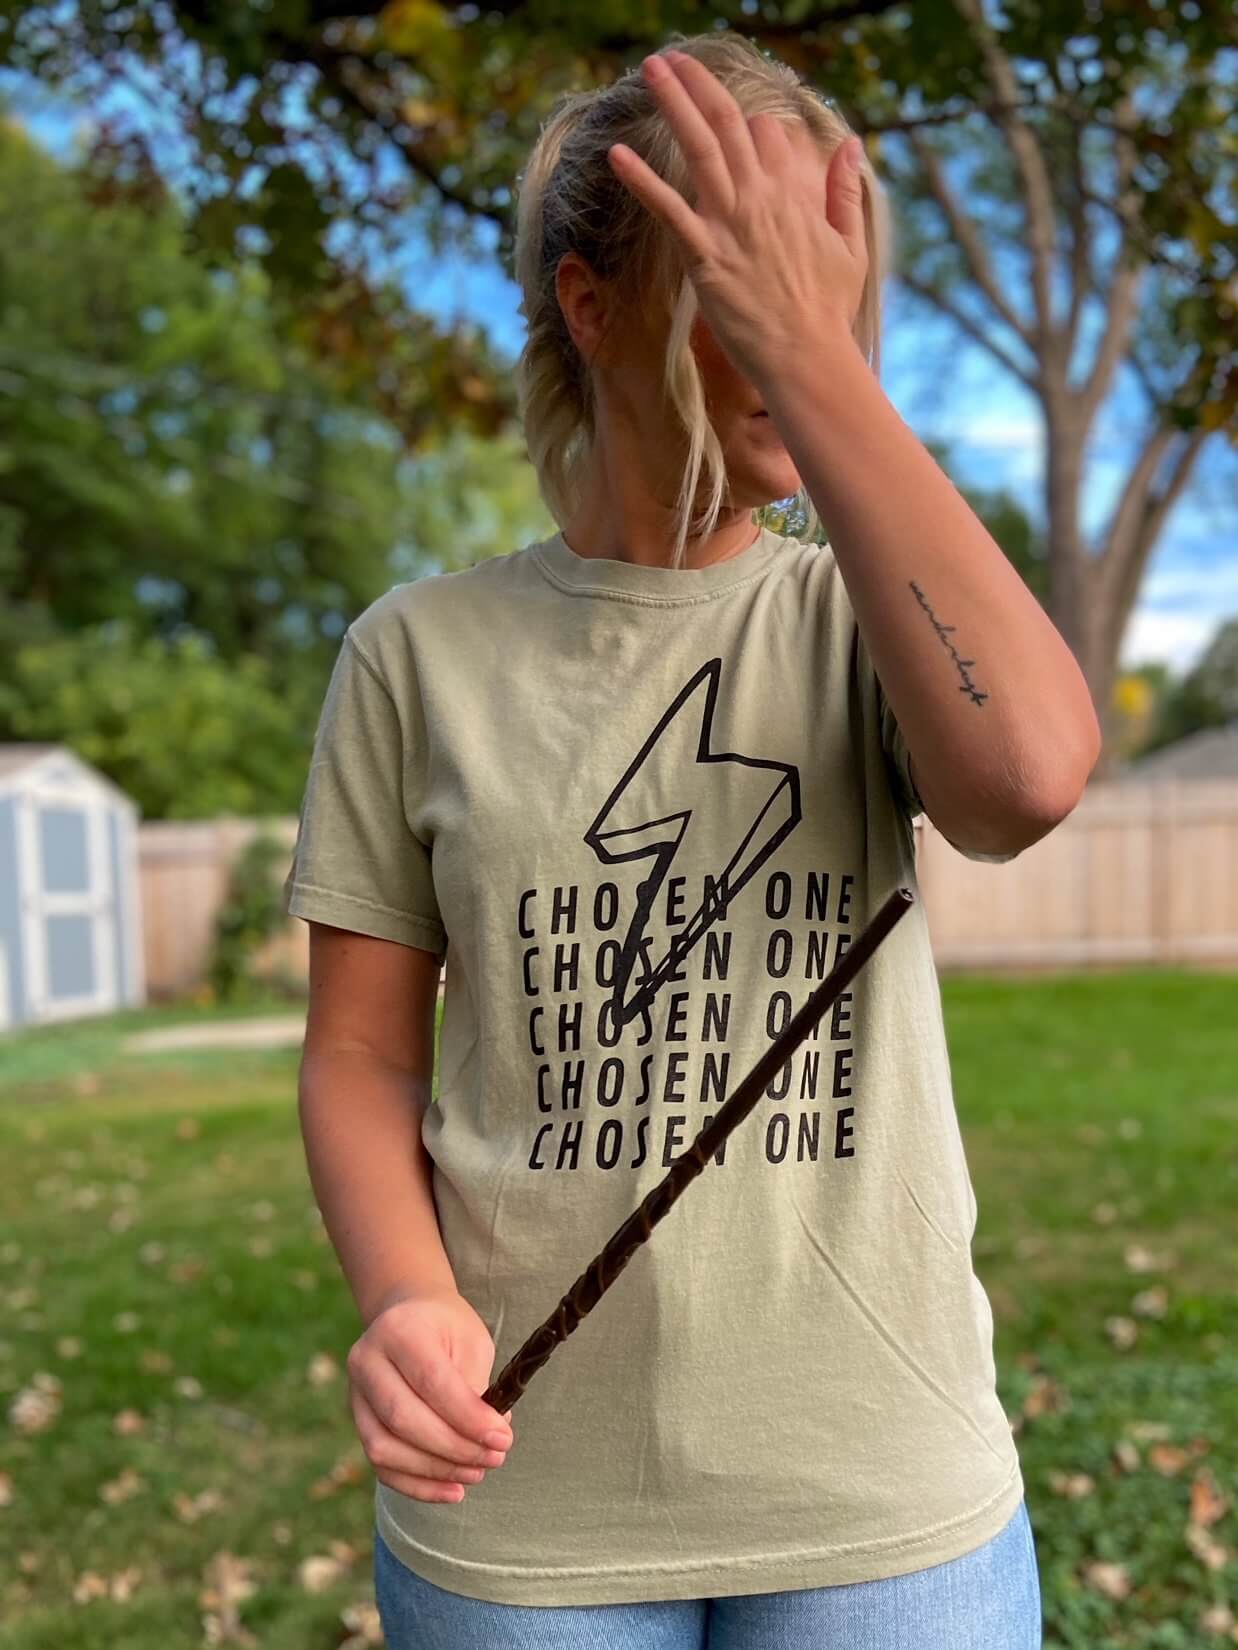 sage green tshirt that repeats the words "Chosen One" vertically with a lightning bolt overlapping.